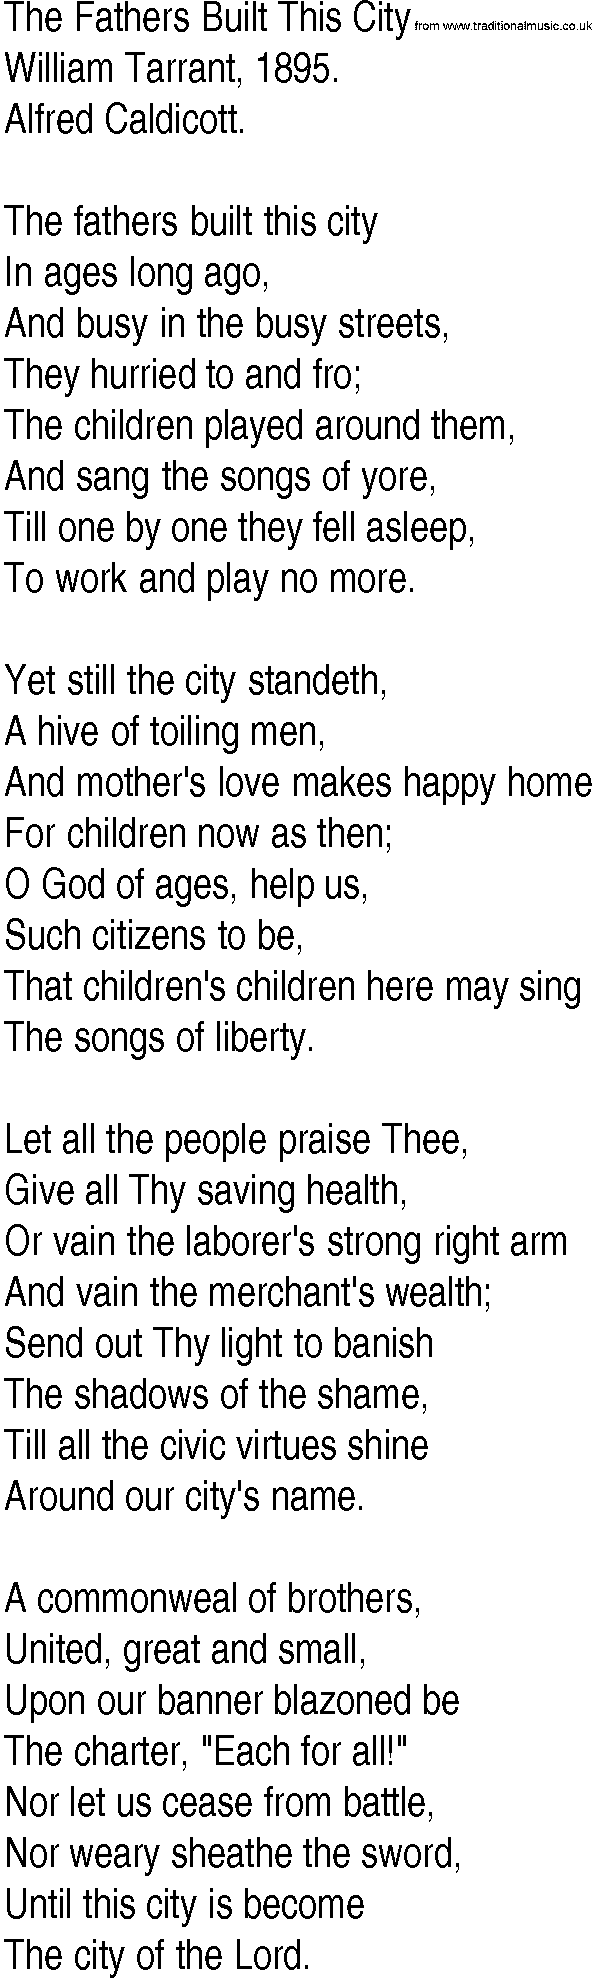 Hymn and Gospel Song: The Fathers Built This City by William Tarrant lyrics